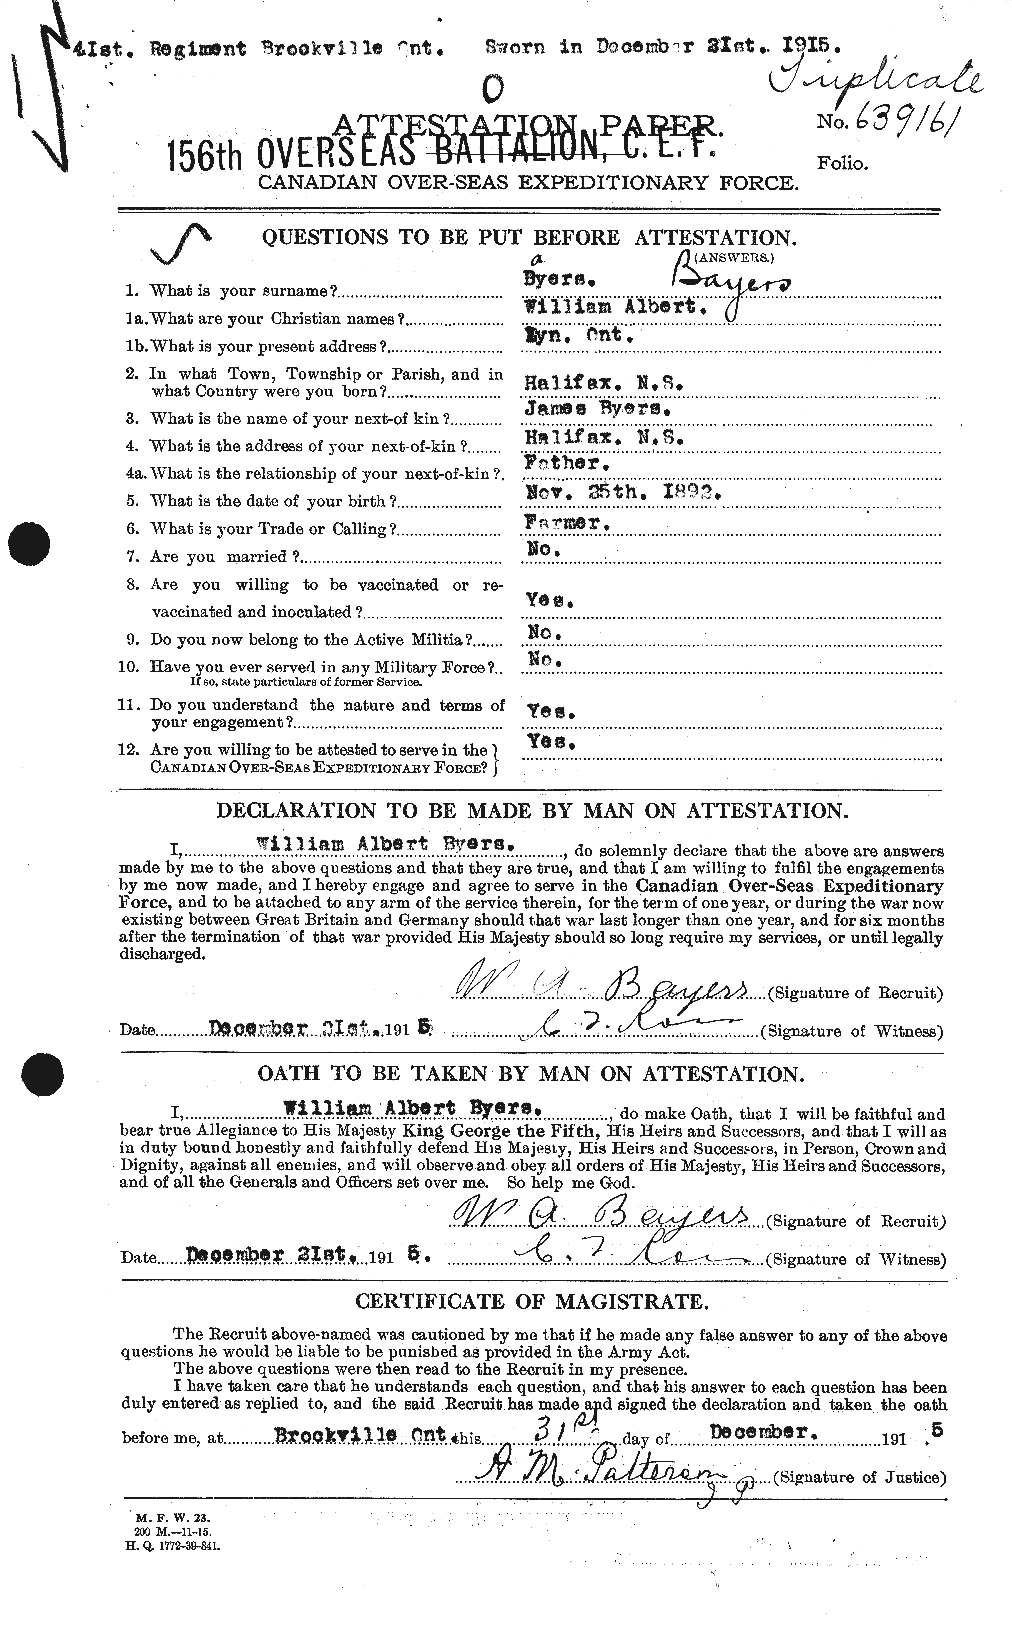 Personnel Records of the First World War - CEF 229577a